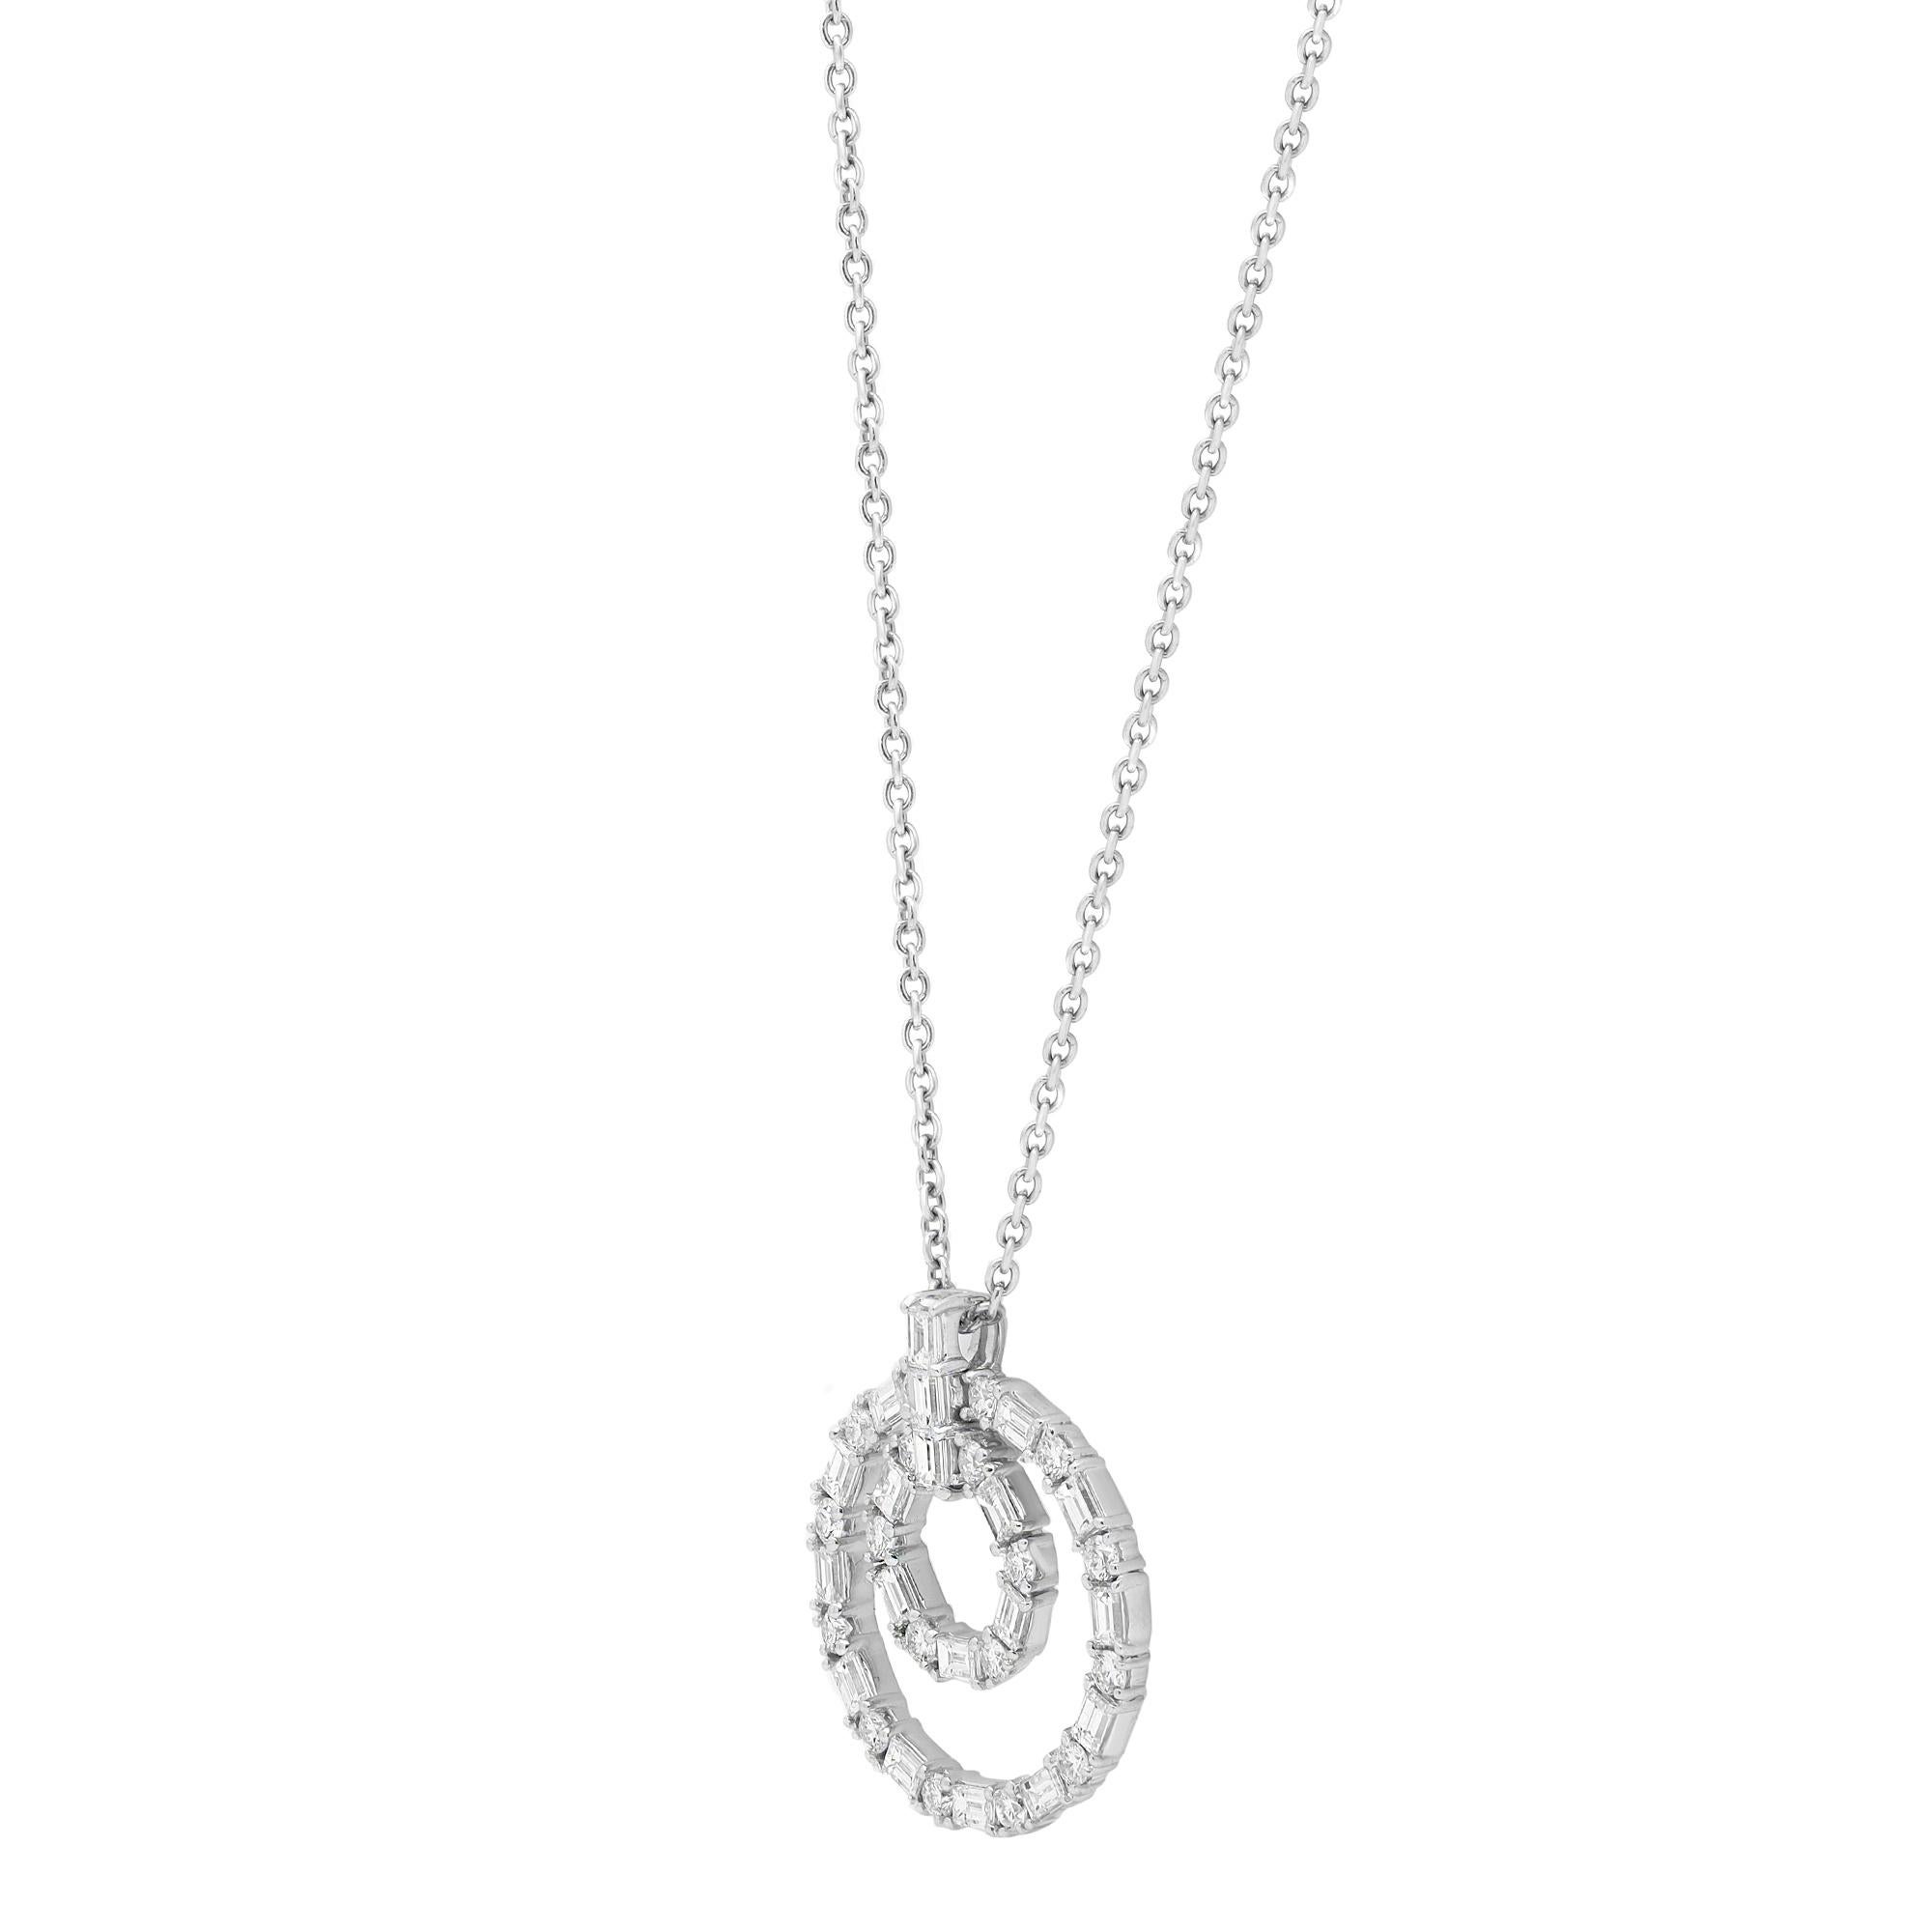 interlocking circle necklace with pave accents jewlr